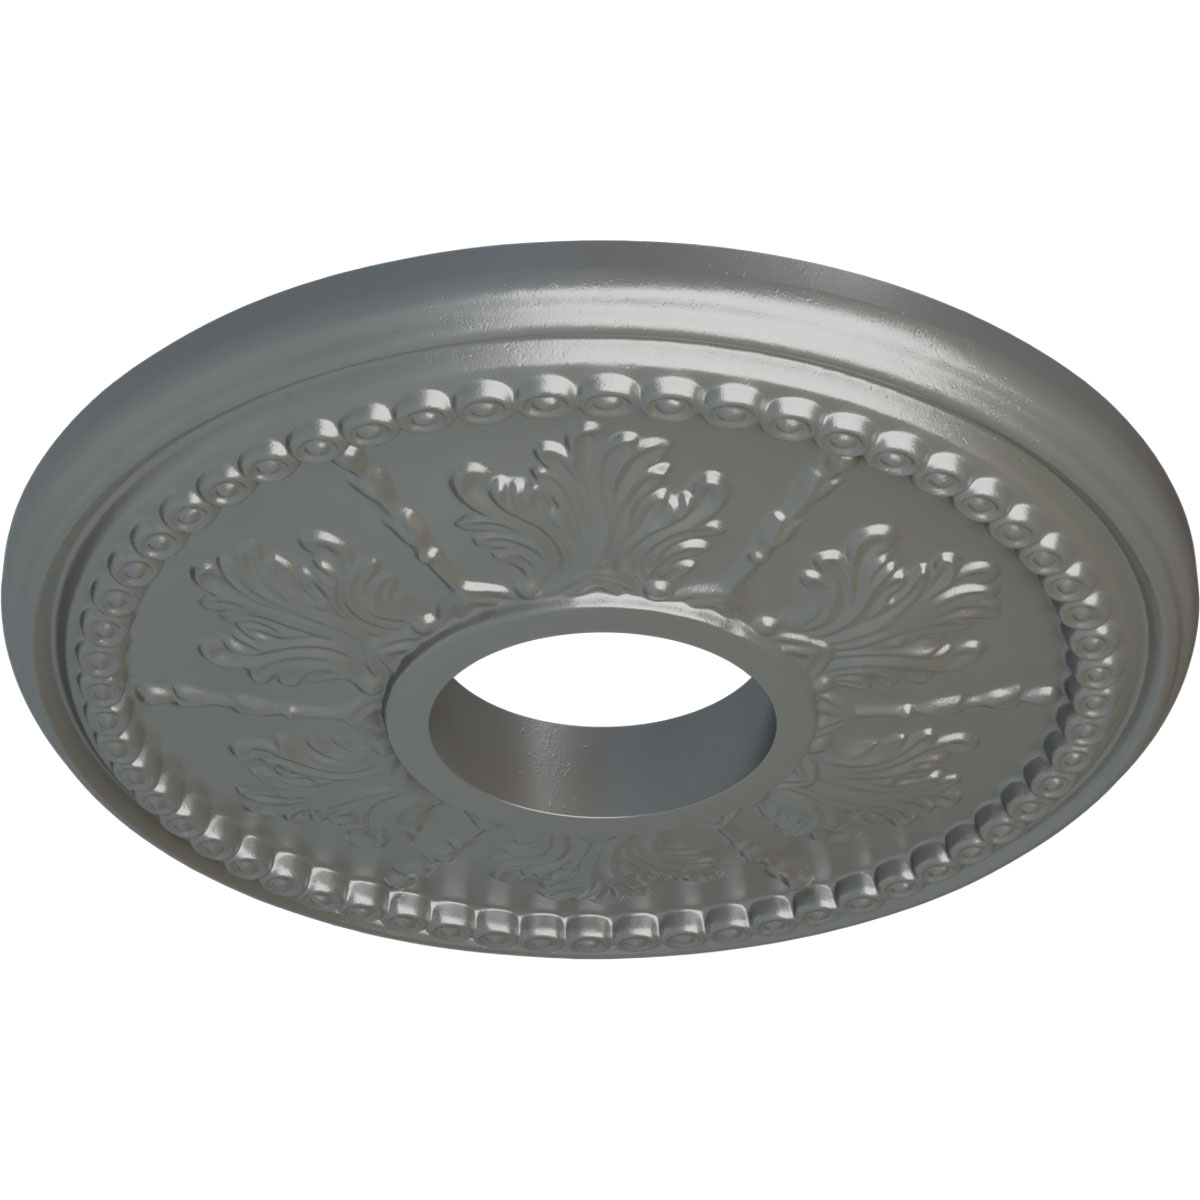 Ekena Millwork 13 7/8"OD x 3 3/4"ID x 1 1/4"P Tirana Ceiling Medallion (Fits Canopies up to 4 3/4"), Hand-Painted Silver - image 2 of 4